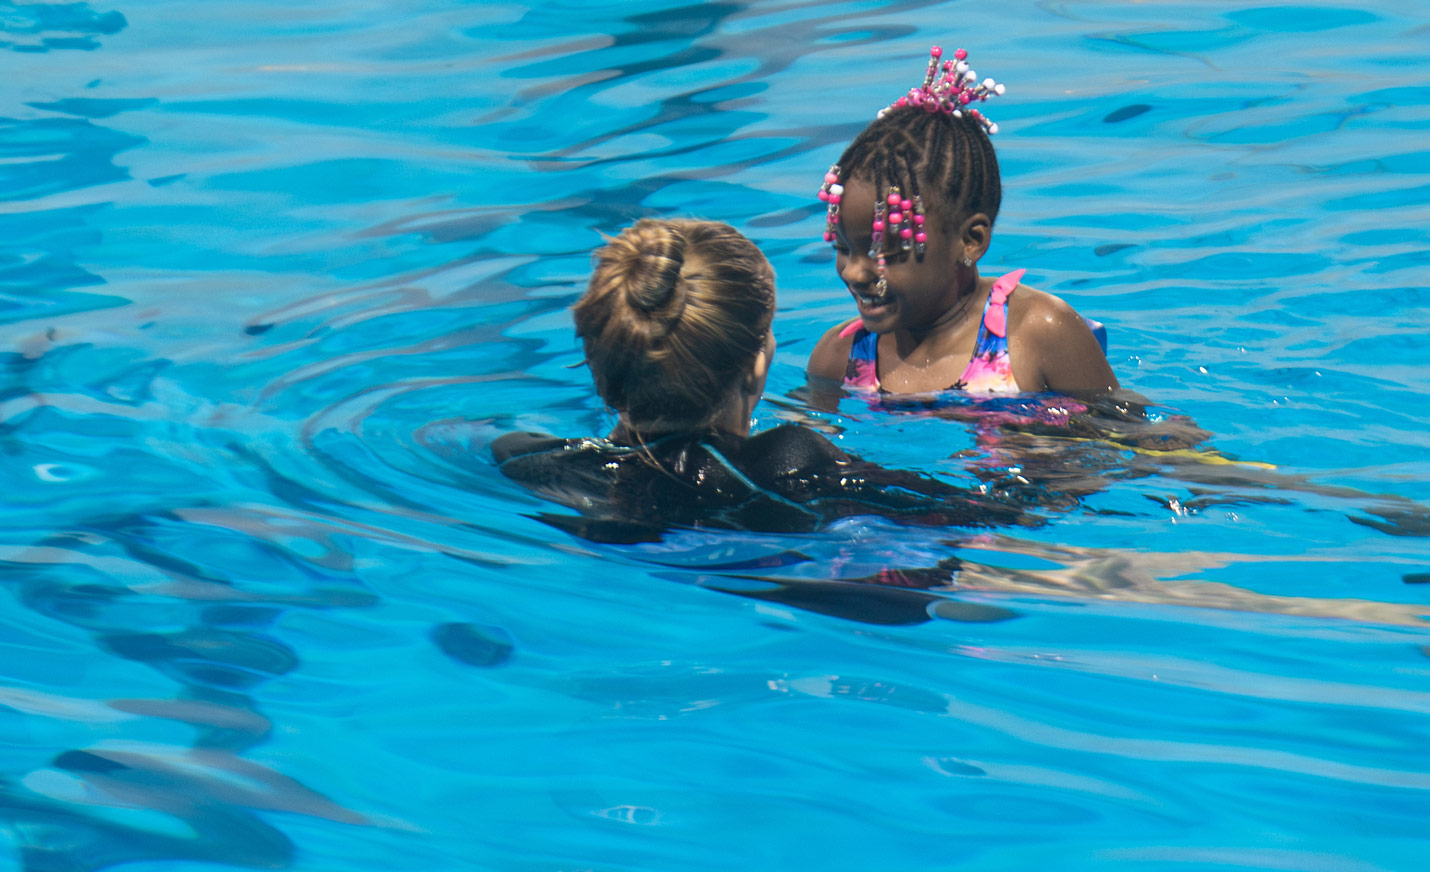 Instructor provides lessons to student as they both hold a kickboard